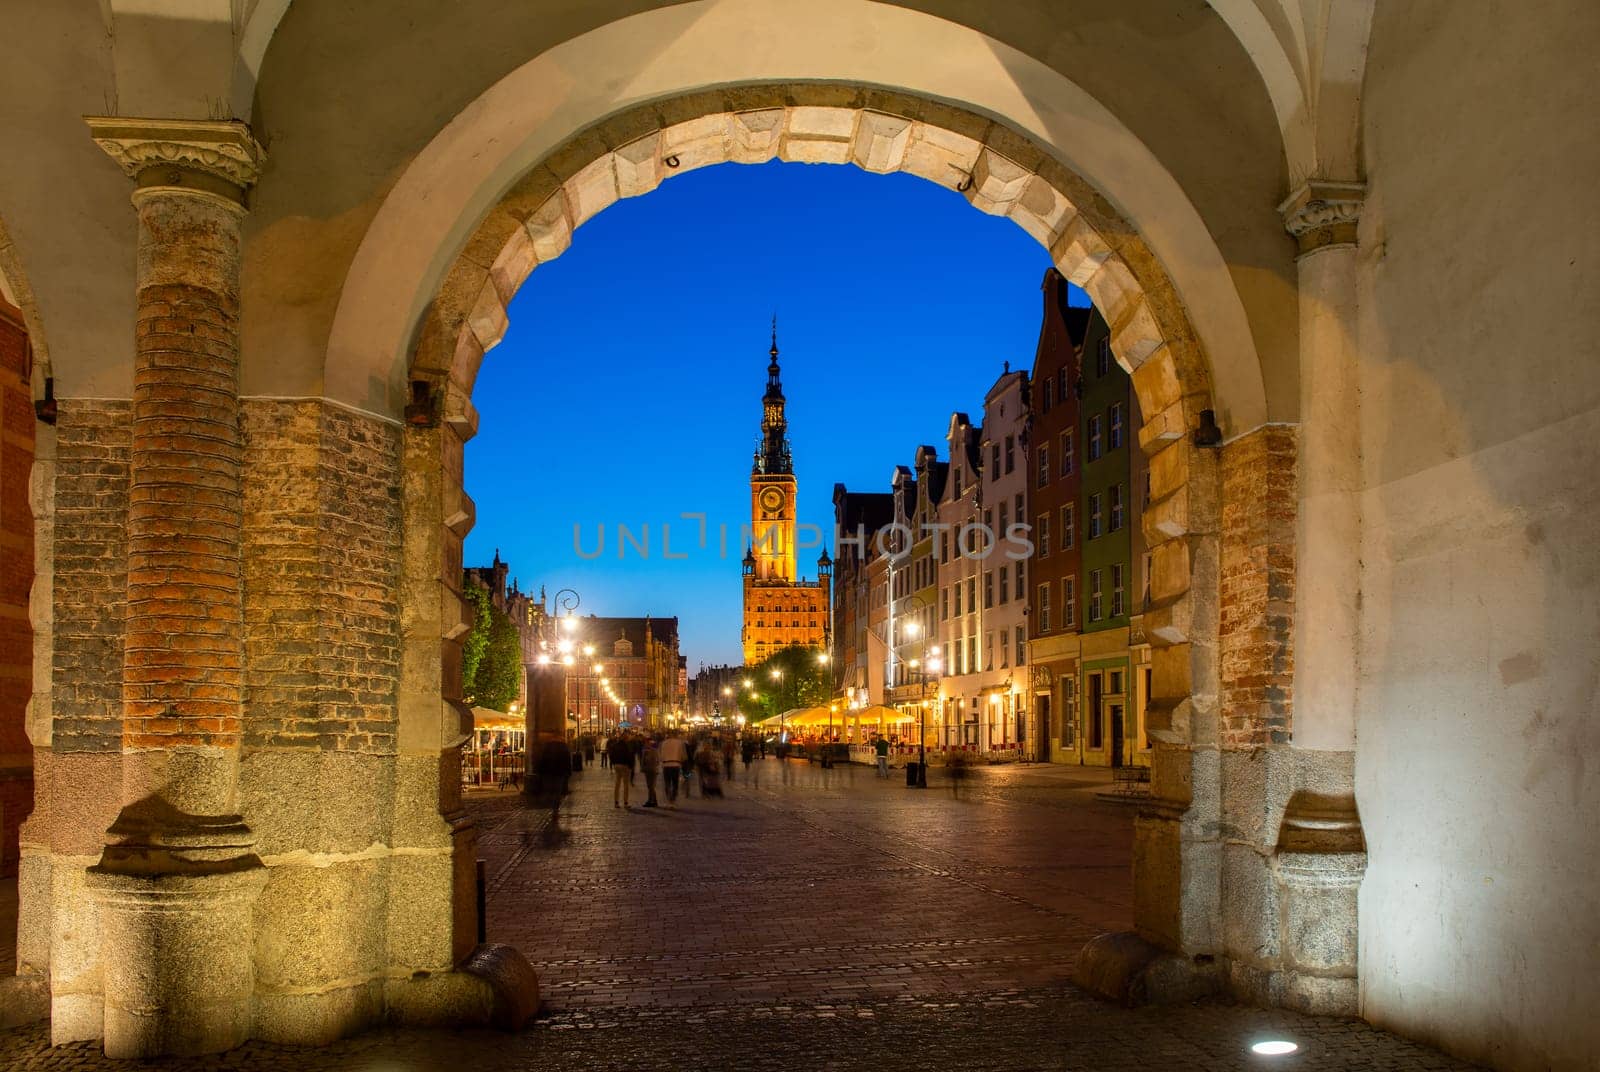 Main Town Hall in the old city of Gdansk, Poland
